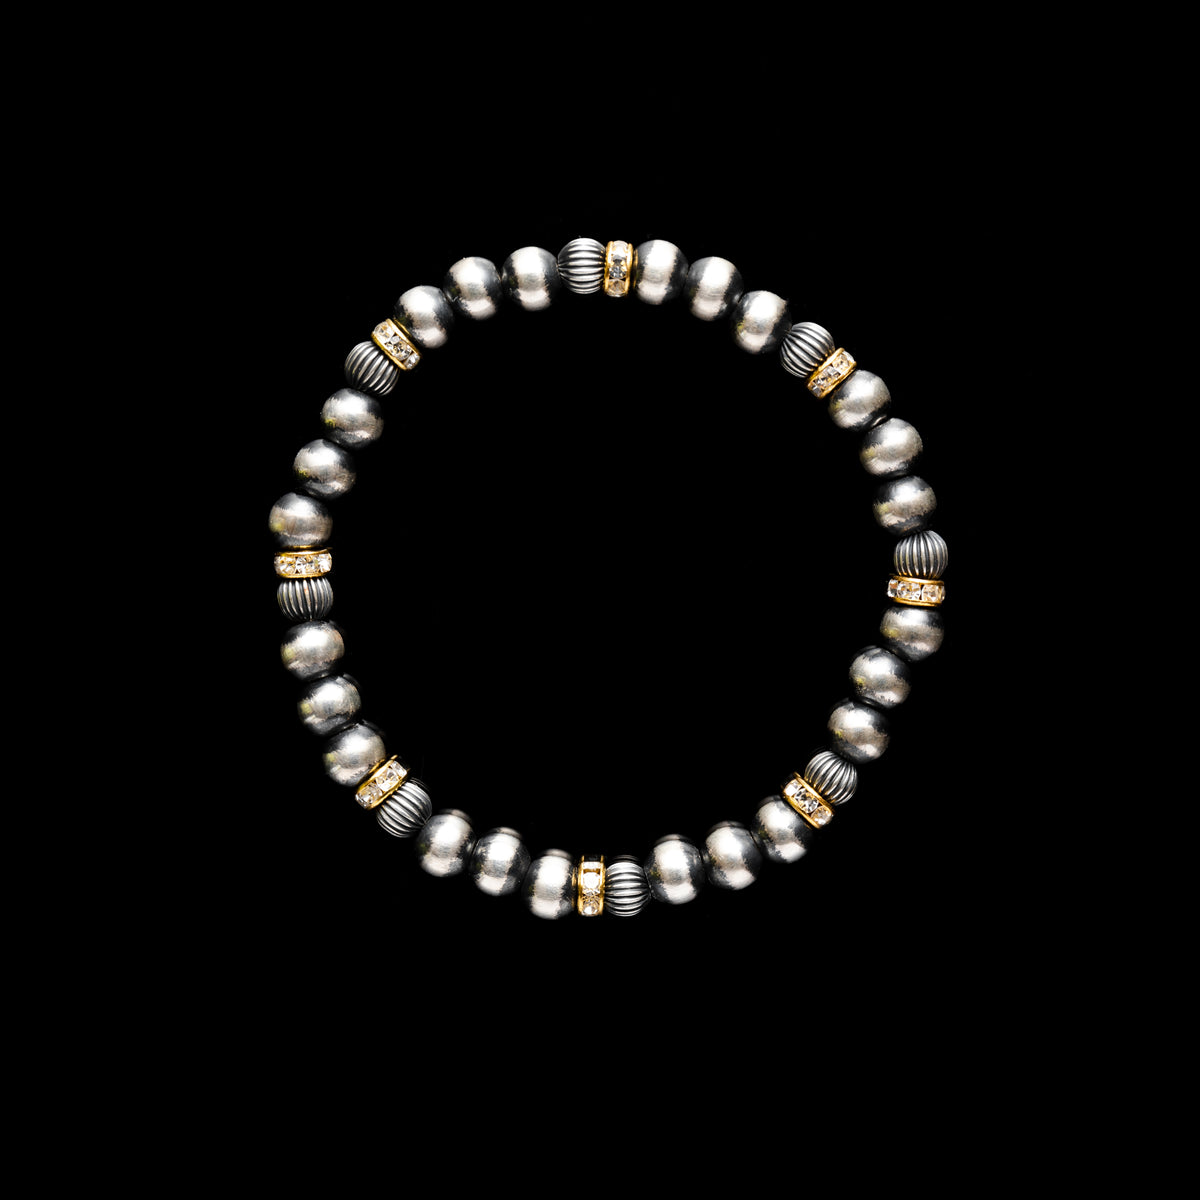 6mm Santa Fe Pearl Stretch Bracelet with Czech Gold Rondelle Beads